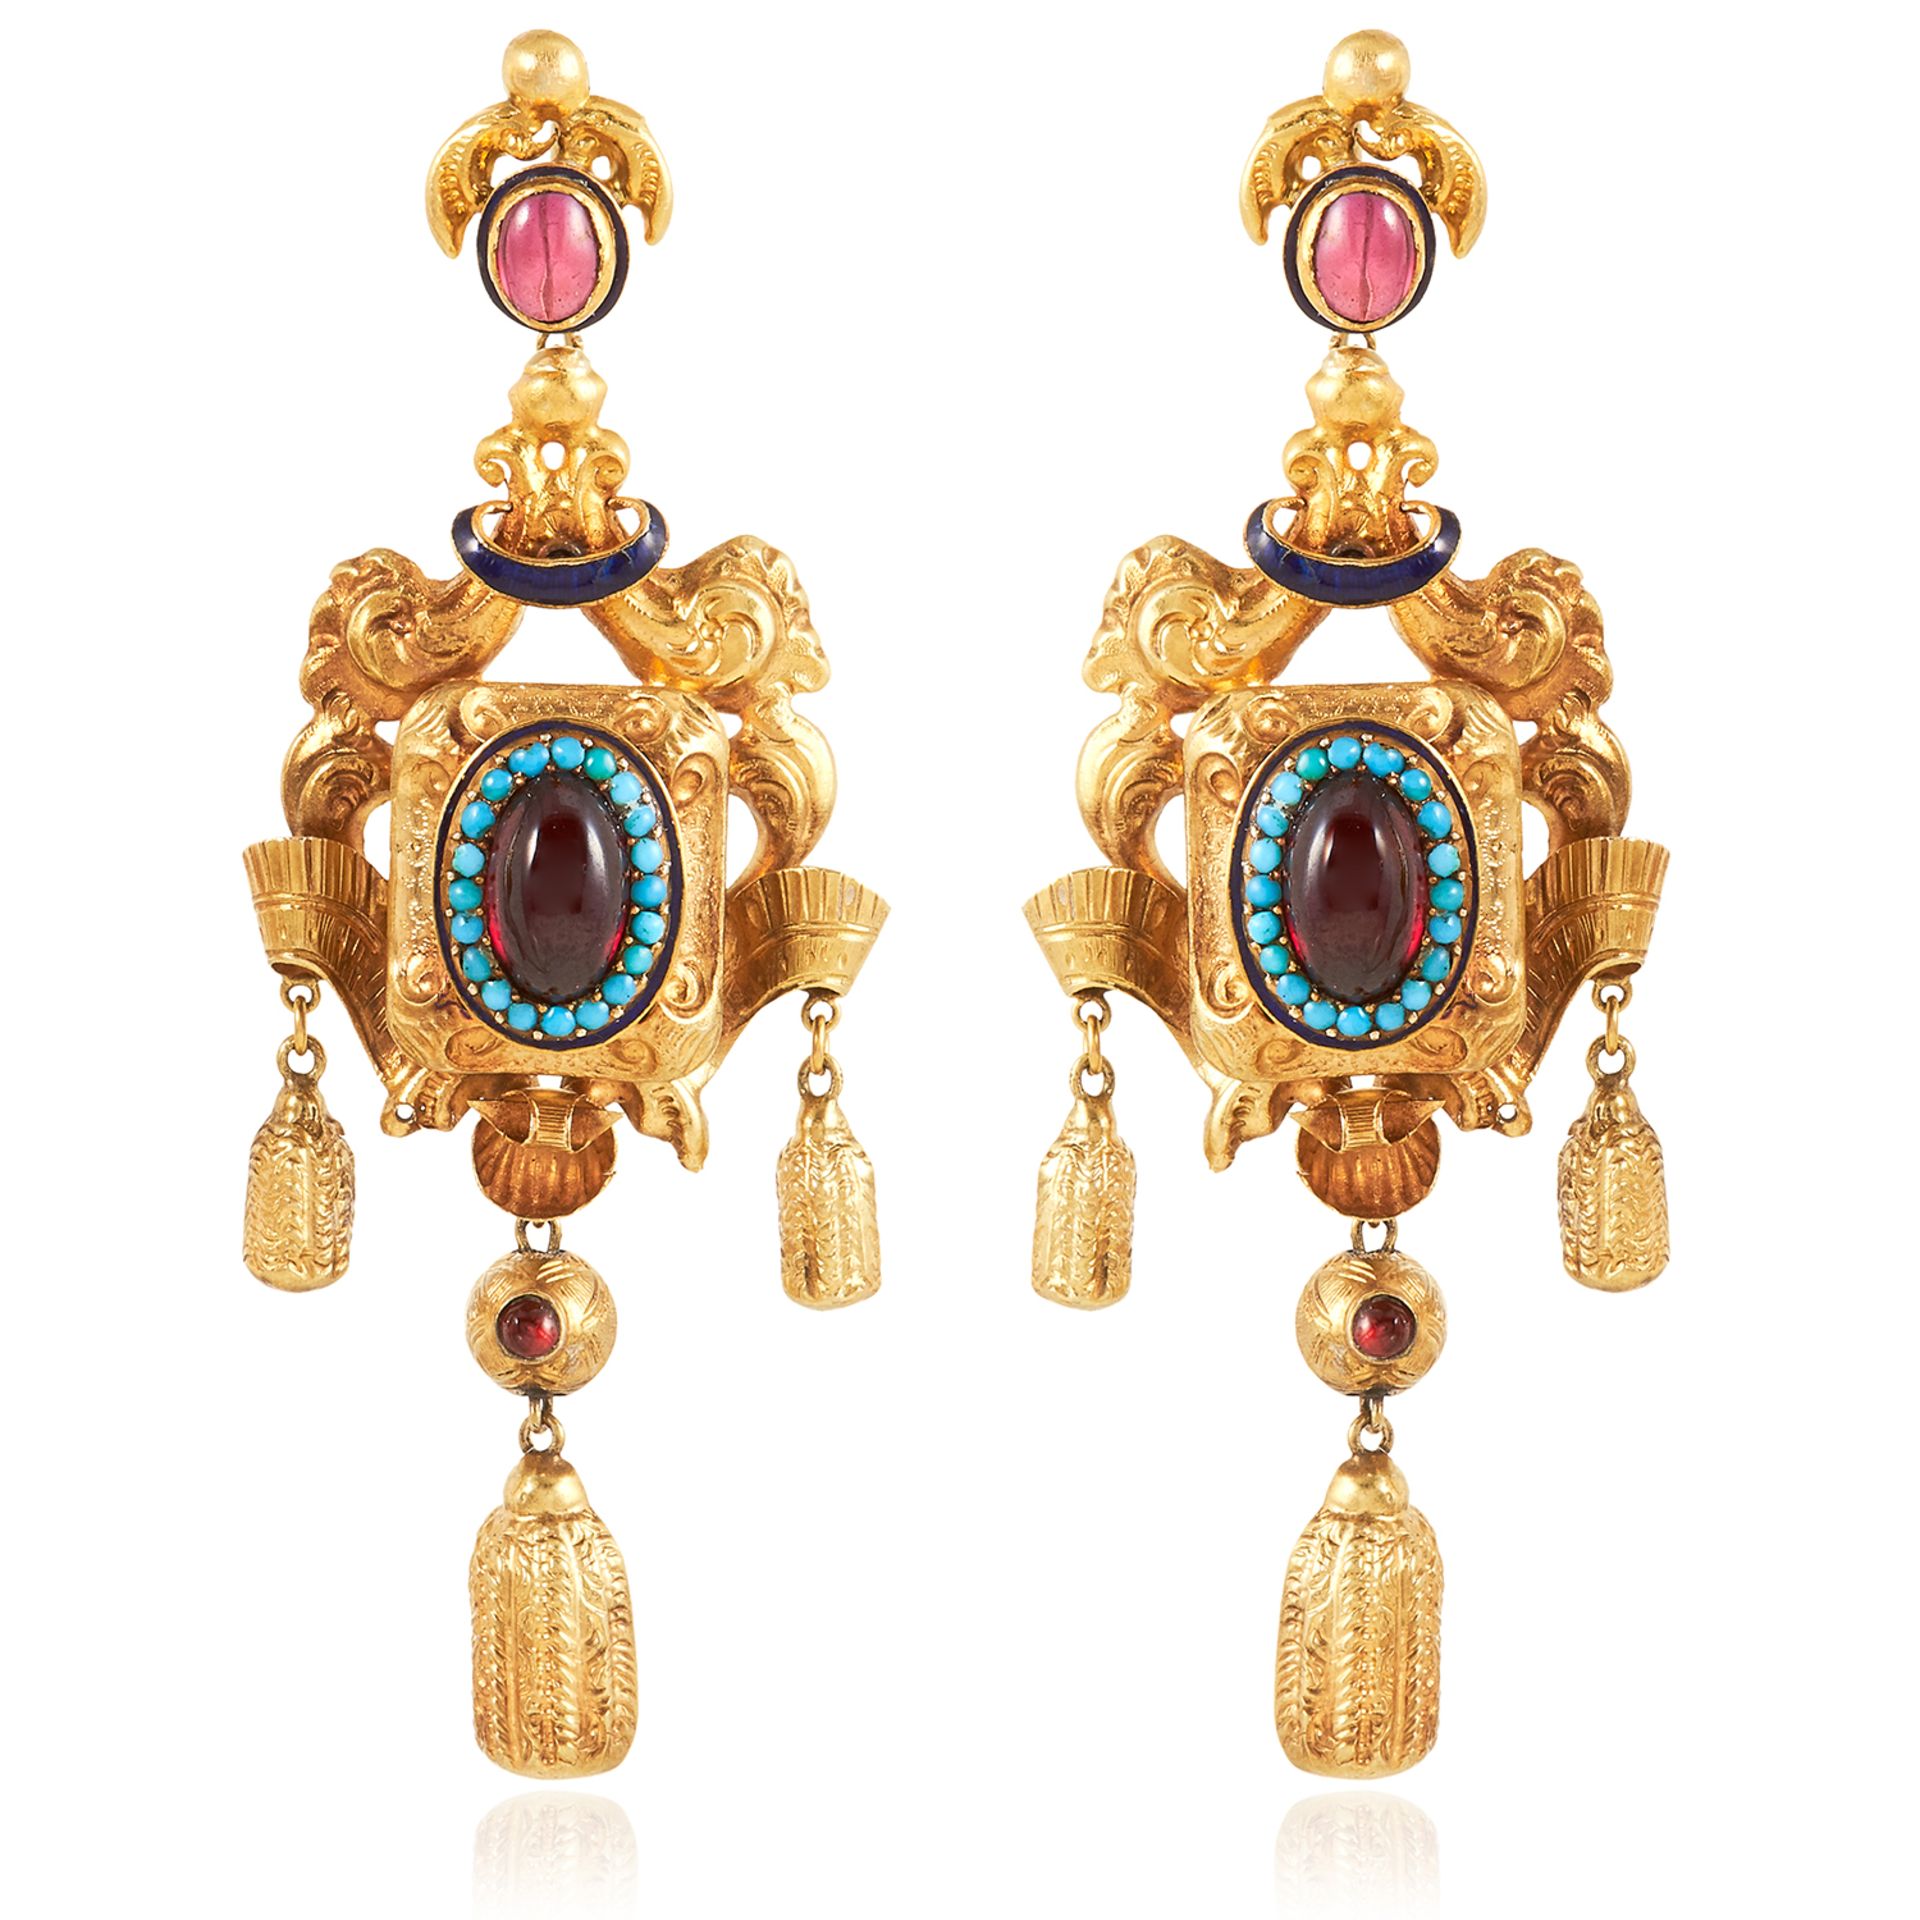 A PAIR OF ANTIQUE GARNET, TURQUOISE AND ENAMEL EARRINGS in high carat yellow gold, each set with